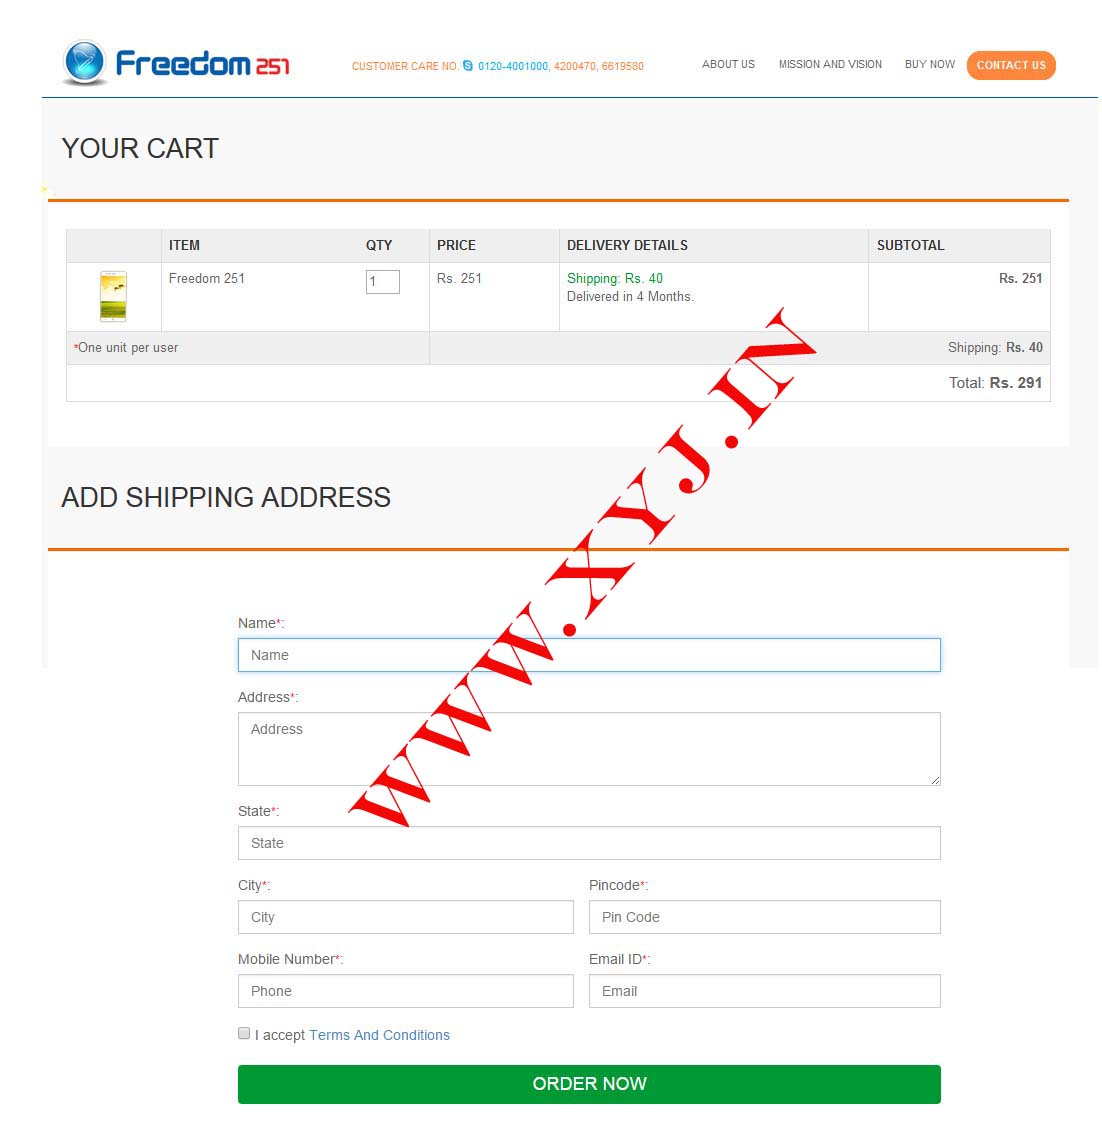 How to Book / Register / Buy Freedom 251 Mobile Online from freedom251.com with Image